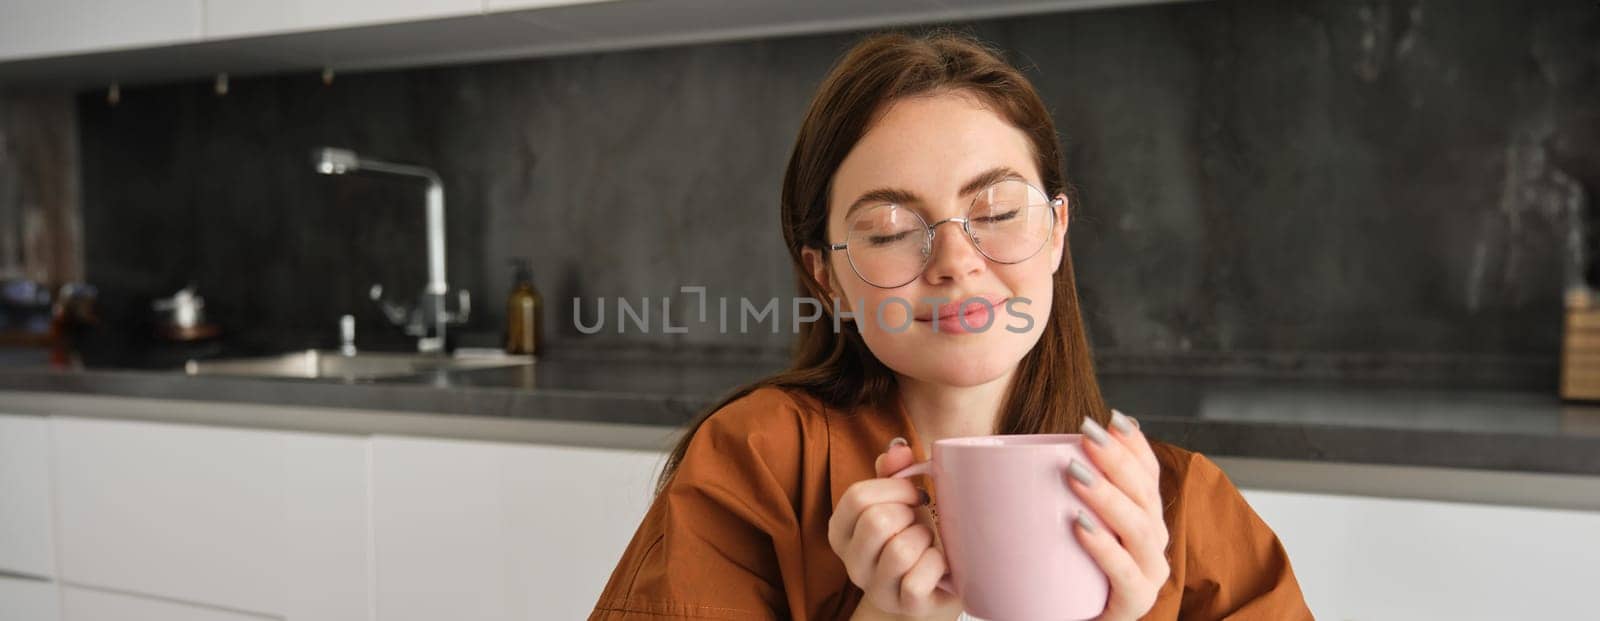 Portrait of beautiful woman in glasses, enjoying cosy autumn day at home, holding cup of coffee and smells great flavour and aroma, smiling pleased.